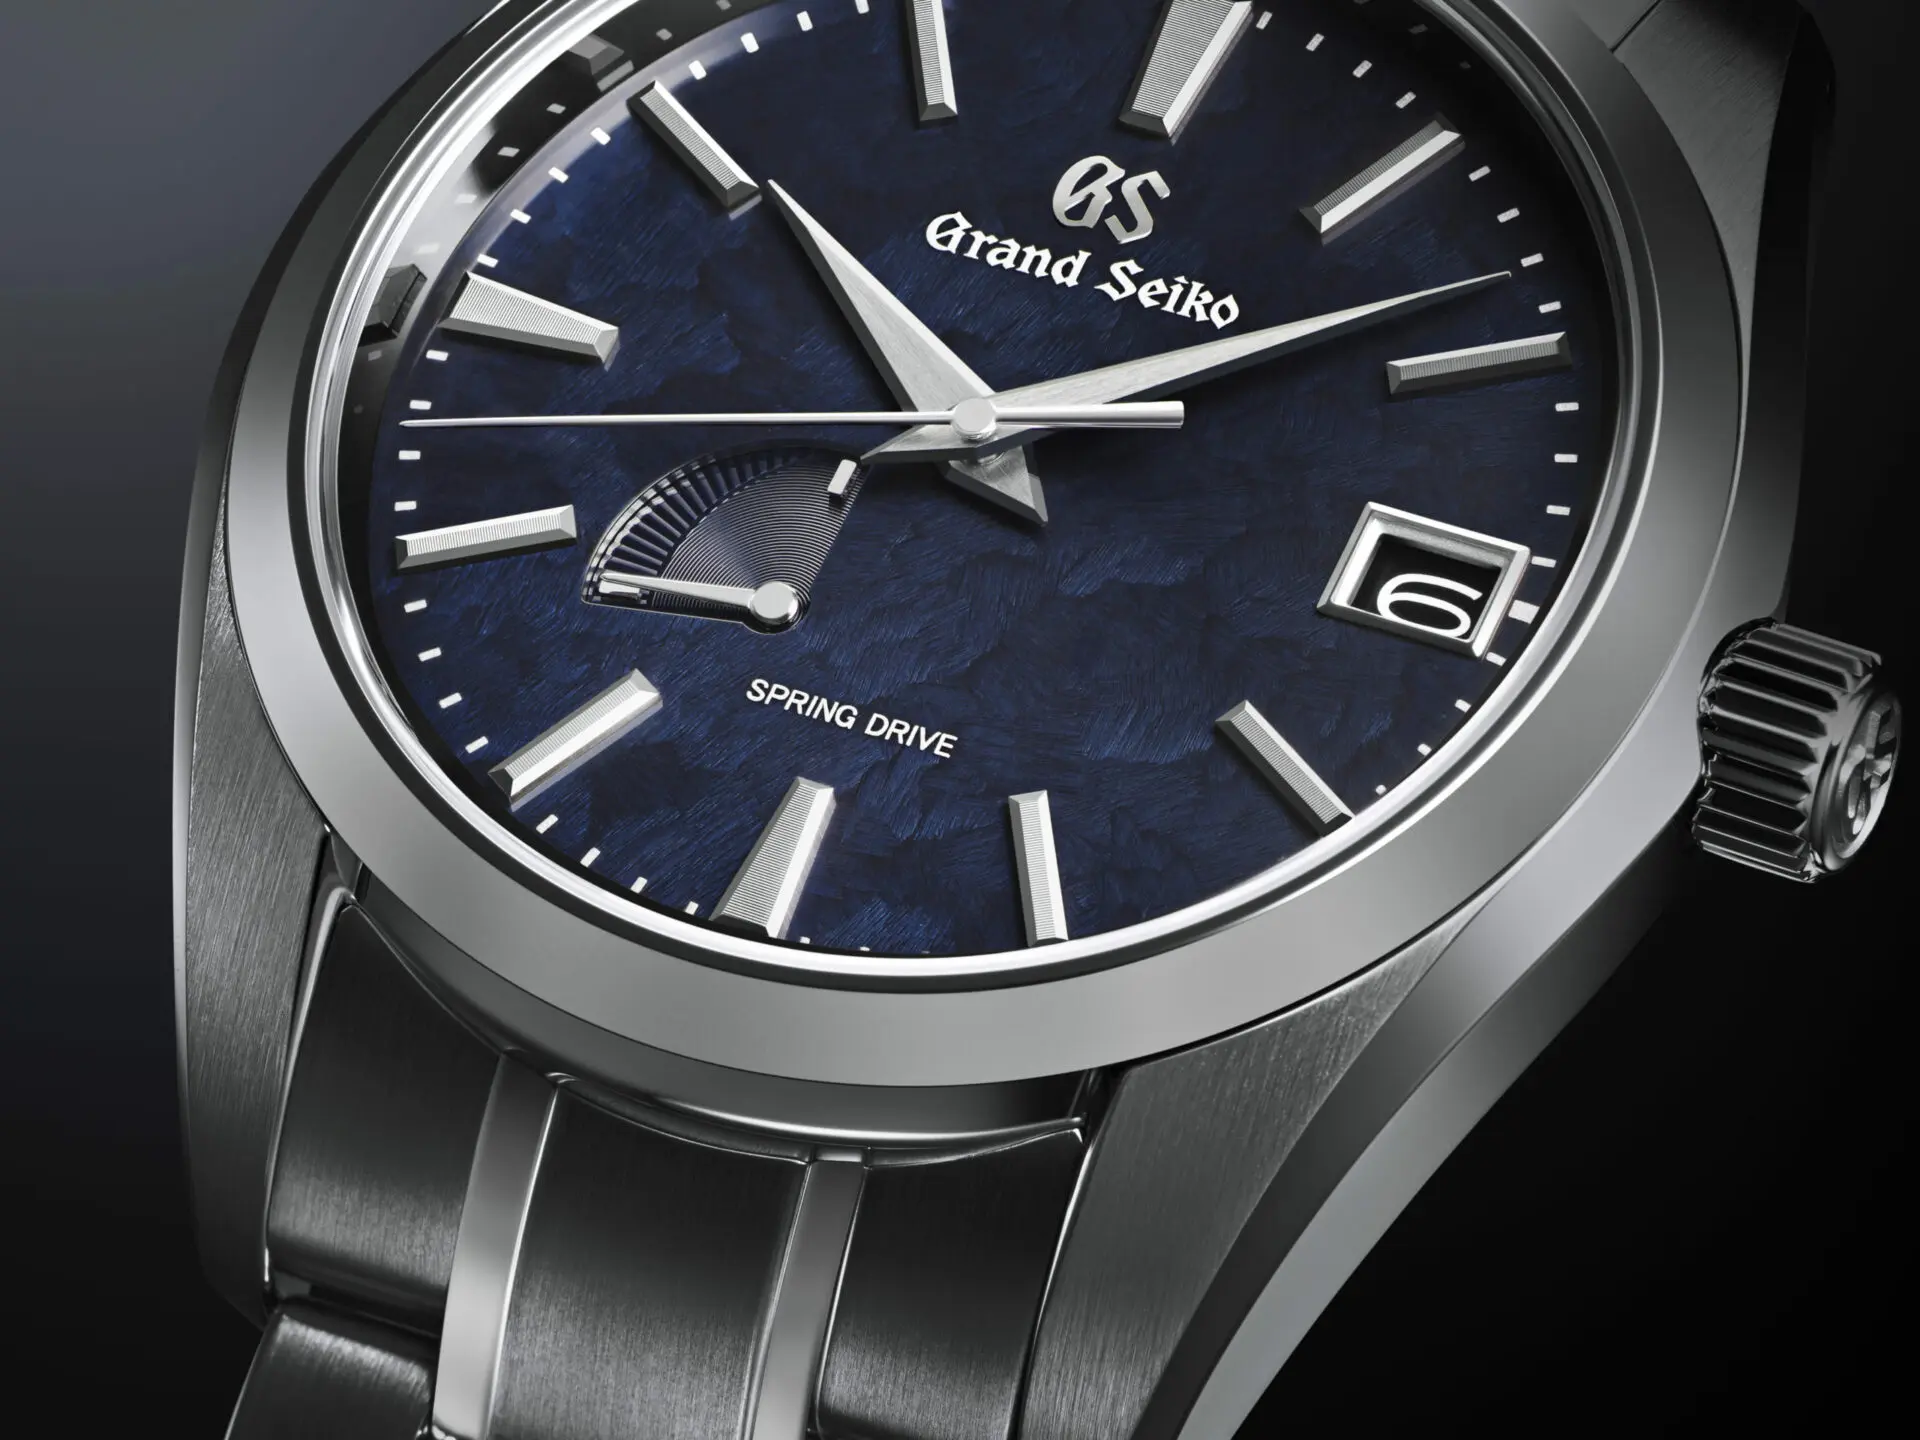 INTRODUCING: The Grand Seiko SBGA469 Boutique Online Exclusive